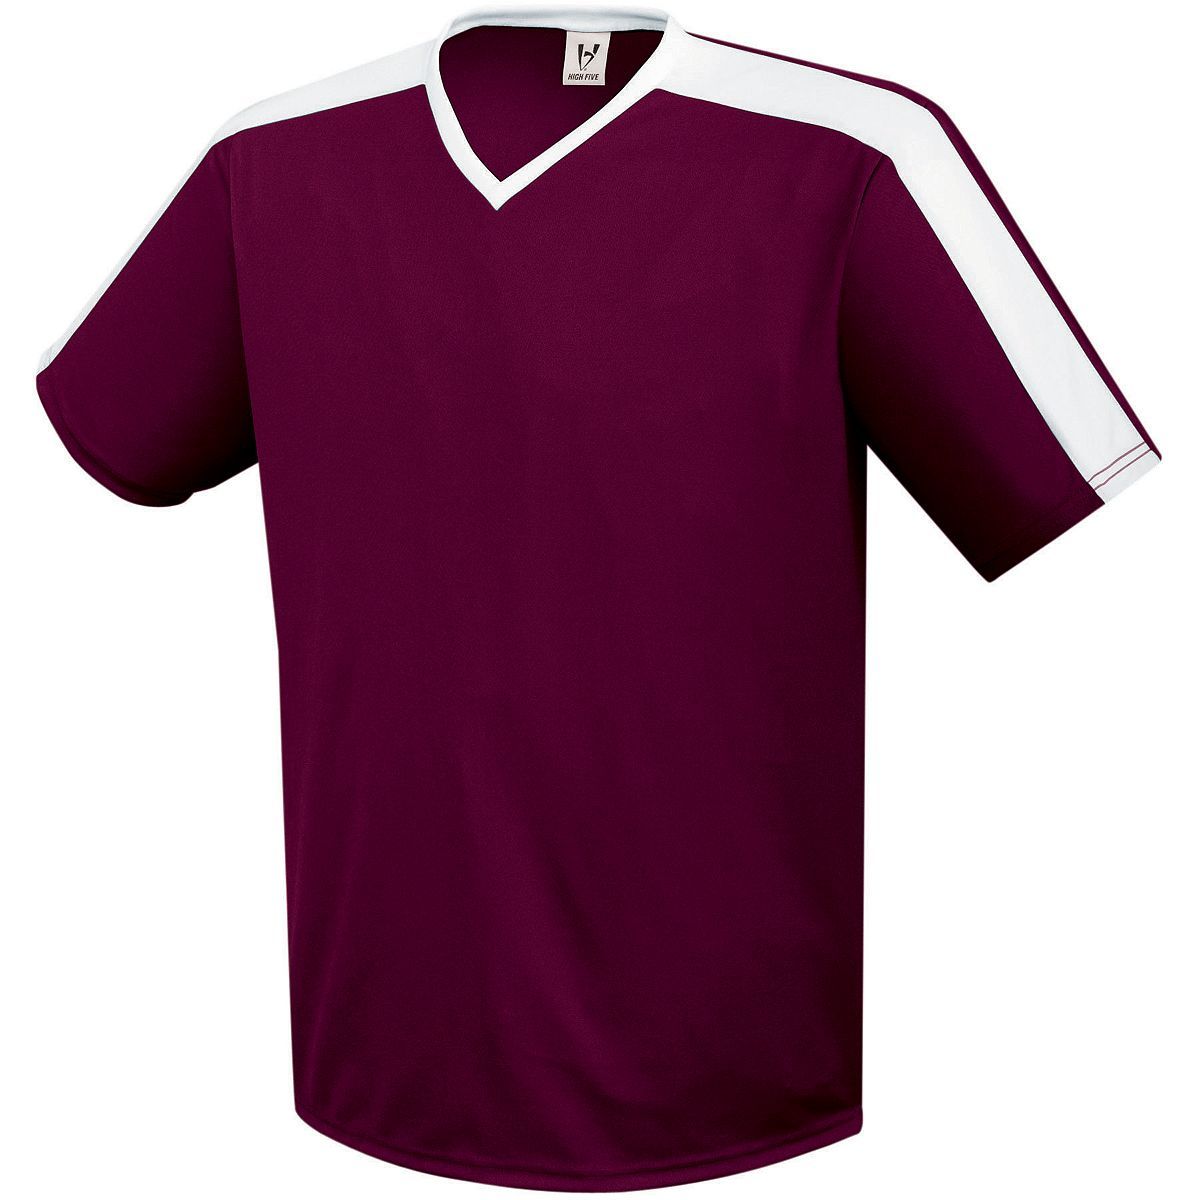 High 5 Youth Genesis Soccer Jersey in Maroon/White  -Part of the Youth, Youth-Jersey, High5-Products, Soccer, Shirts, All-Sports-1 product lines at KanaleyCreations.com